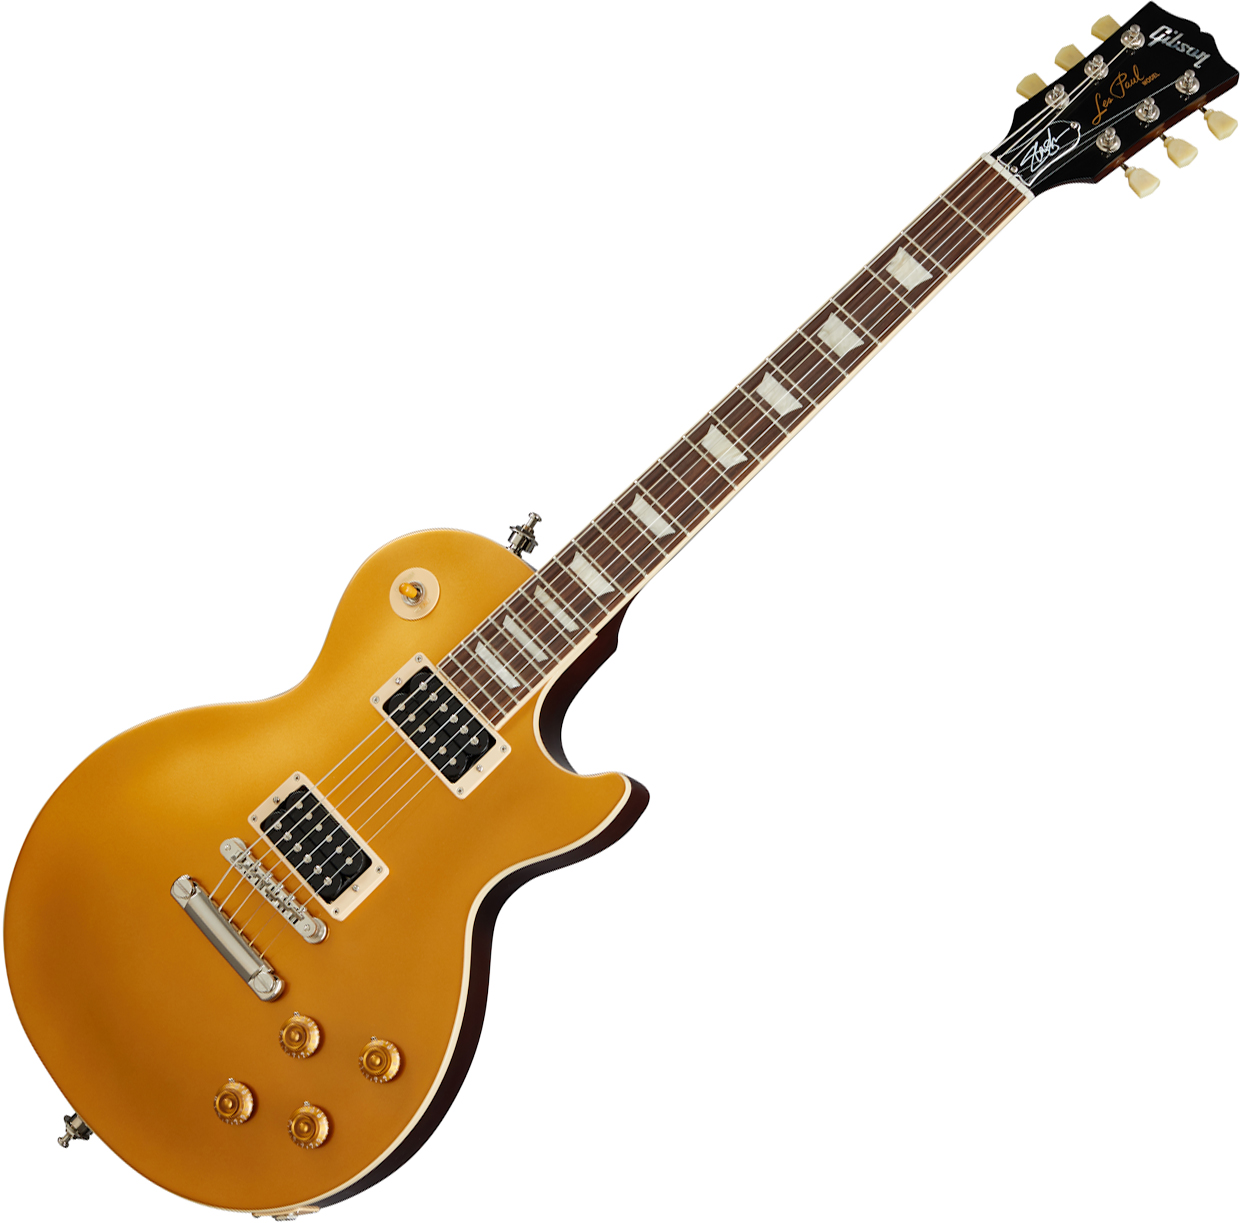 Gibson Slash Victoria Les Paul Standard Goldtop Gold Solid Body Electric Guitar Yellow